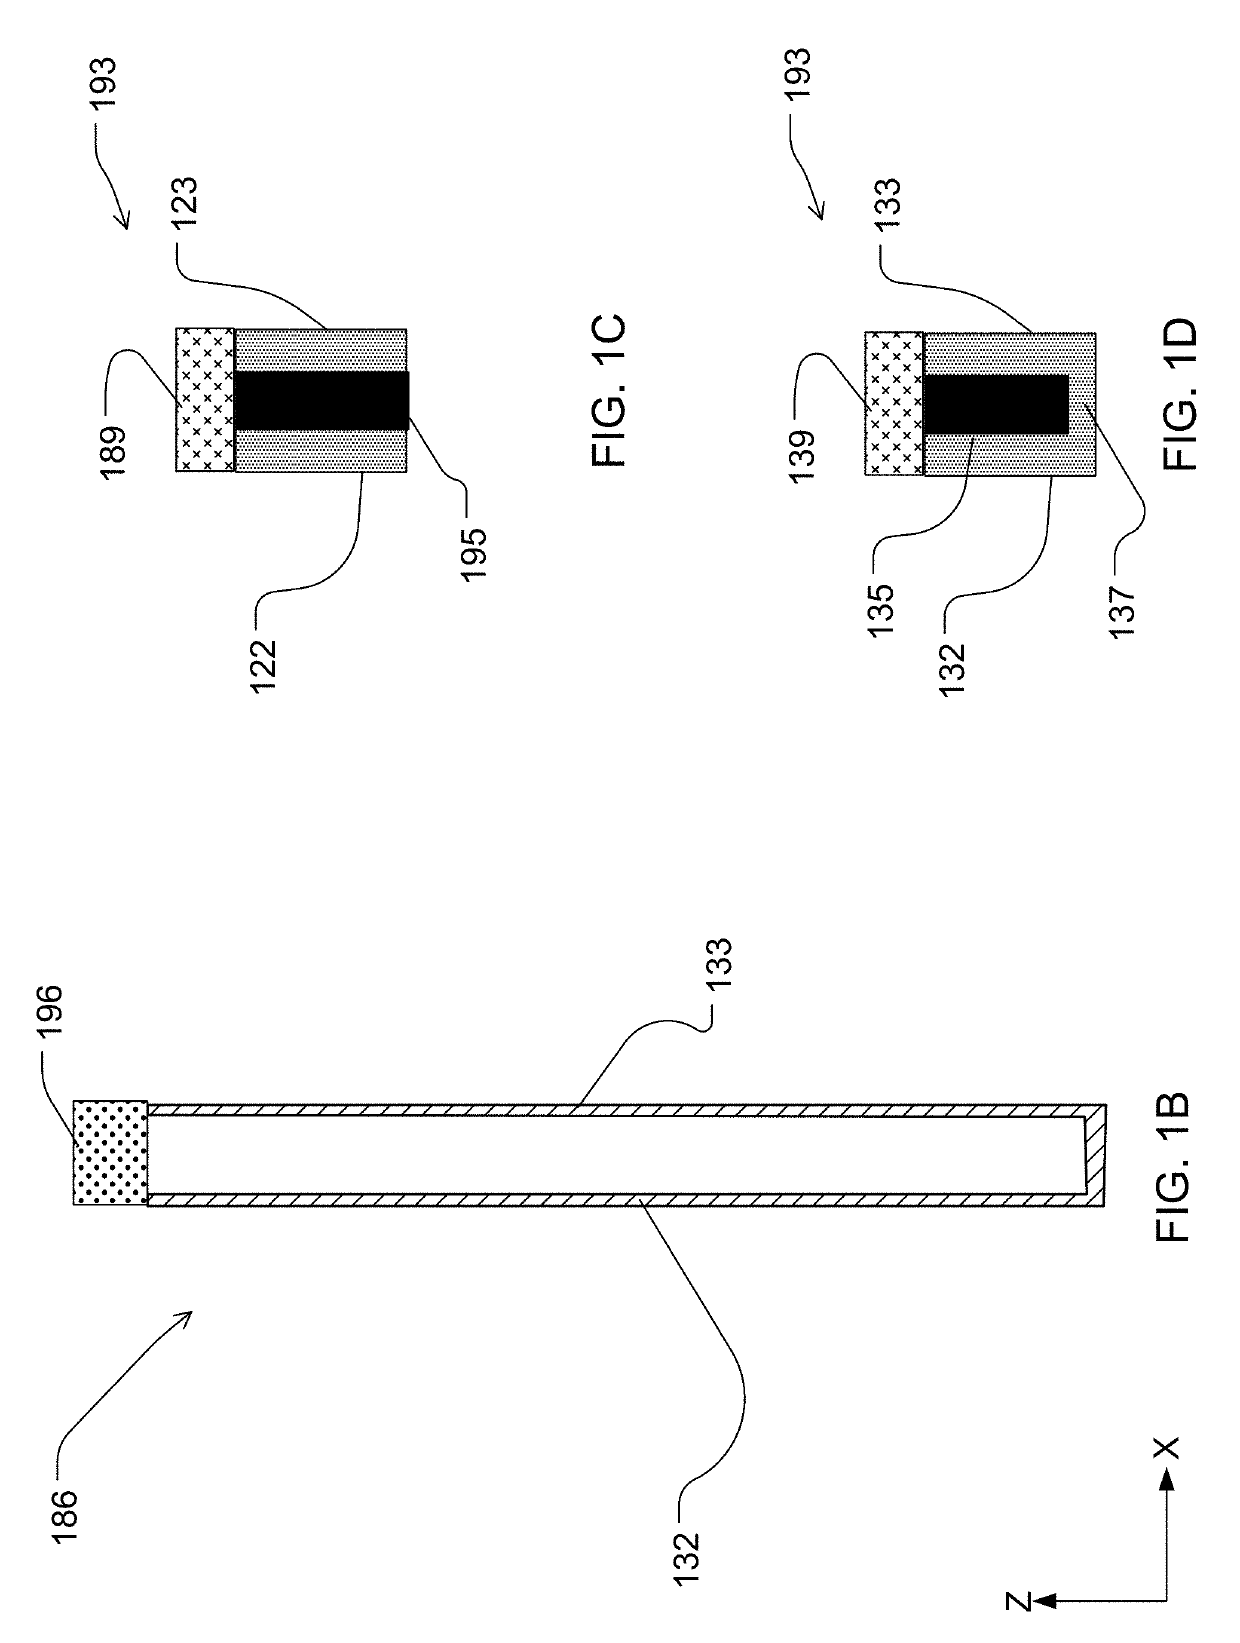 String select line gate oxide method for 3D vertical channel NAND memory